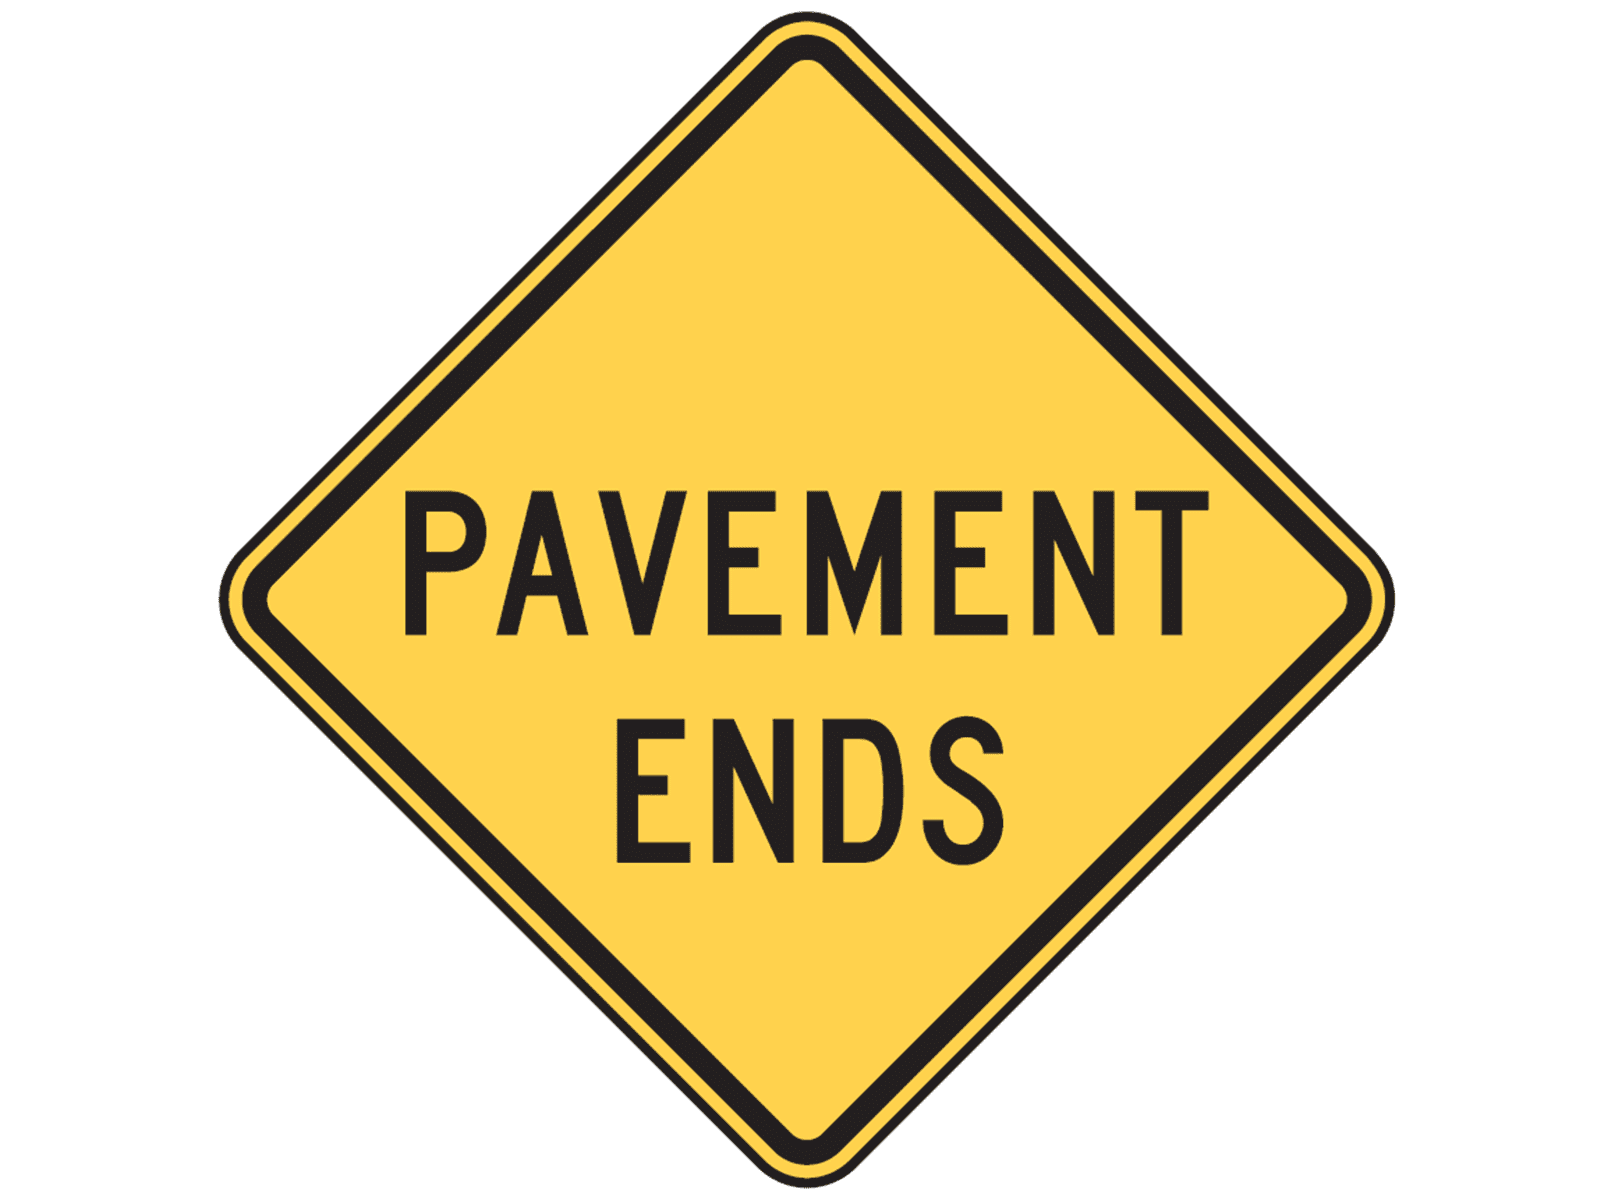 Pavement ends W8-3 - W8: Pavement and Roadway Conditions